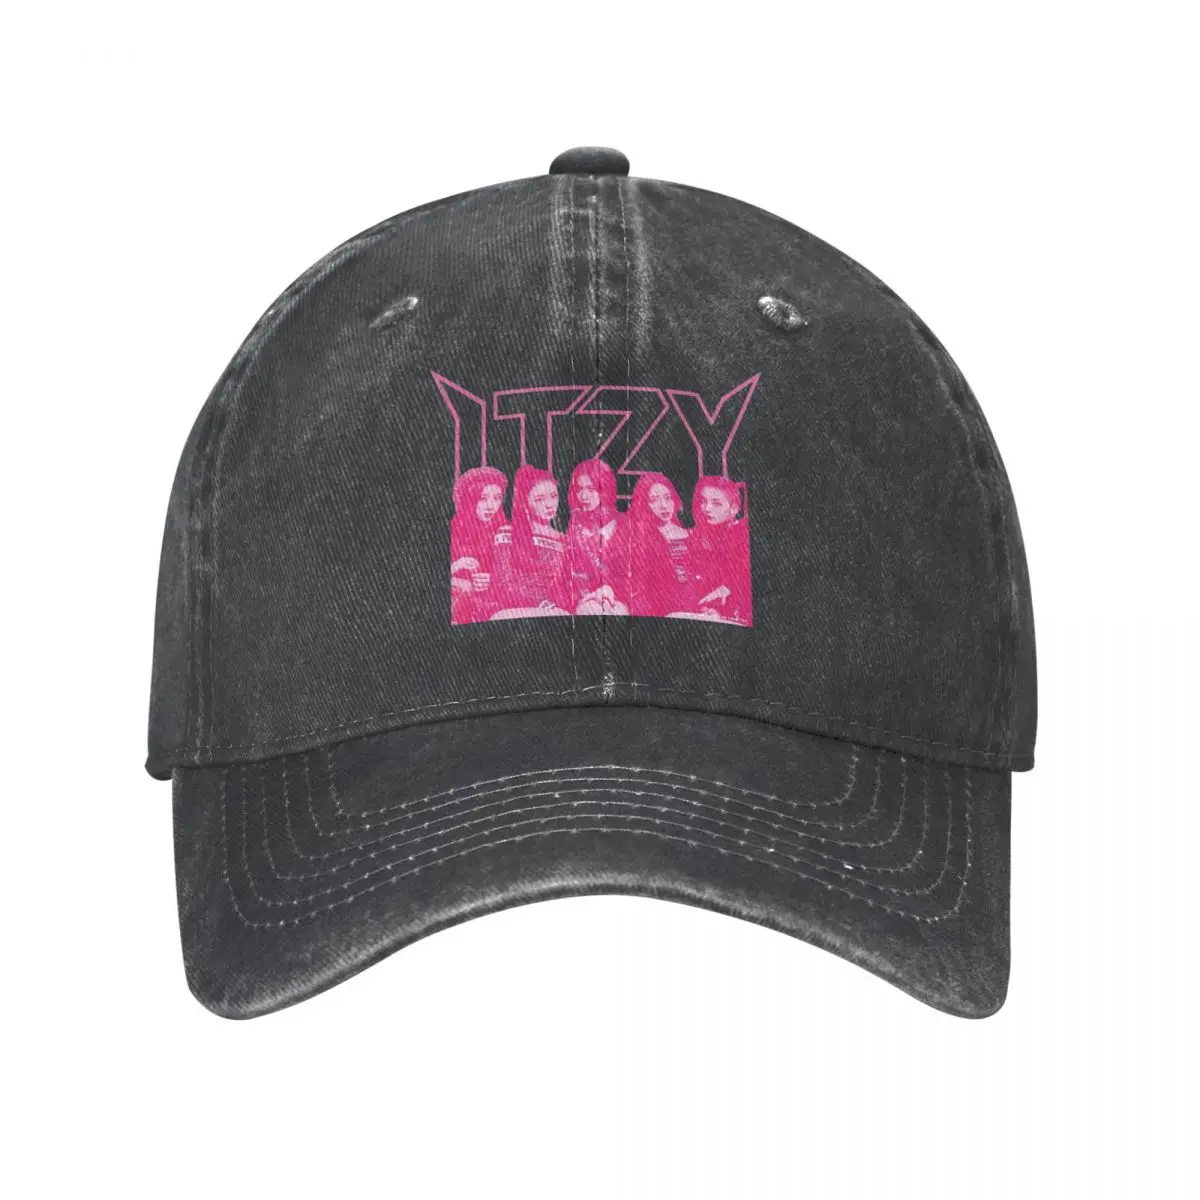 

Metal ITZY Band Baseball Caps Outfits Vintage Distressed Cotton Korean Kpop Dad Hat for Men Women Outdoor Travel Adjustable Fit